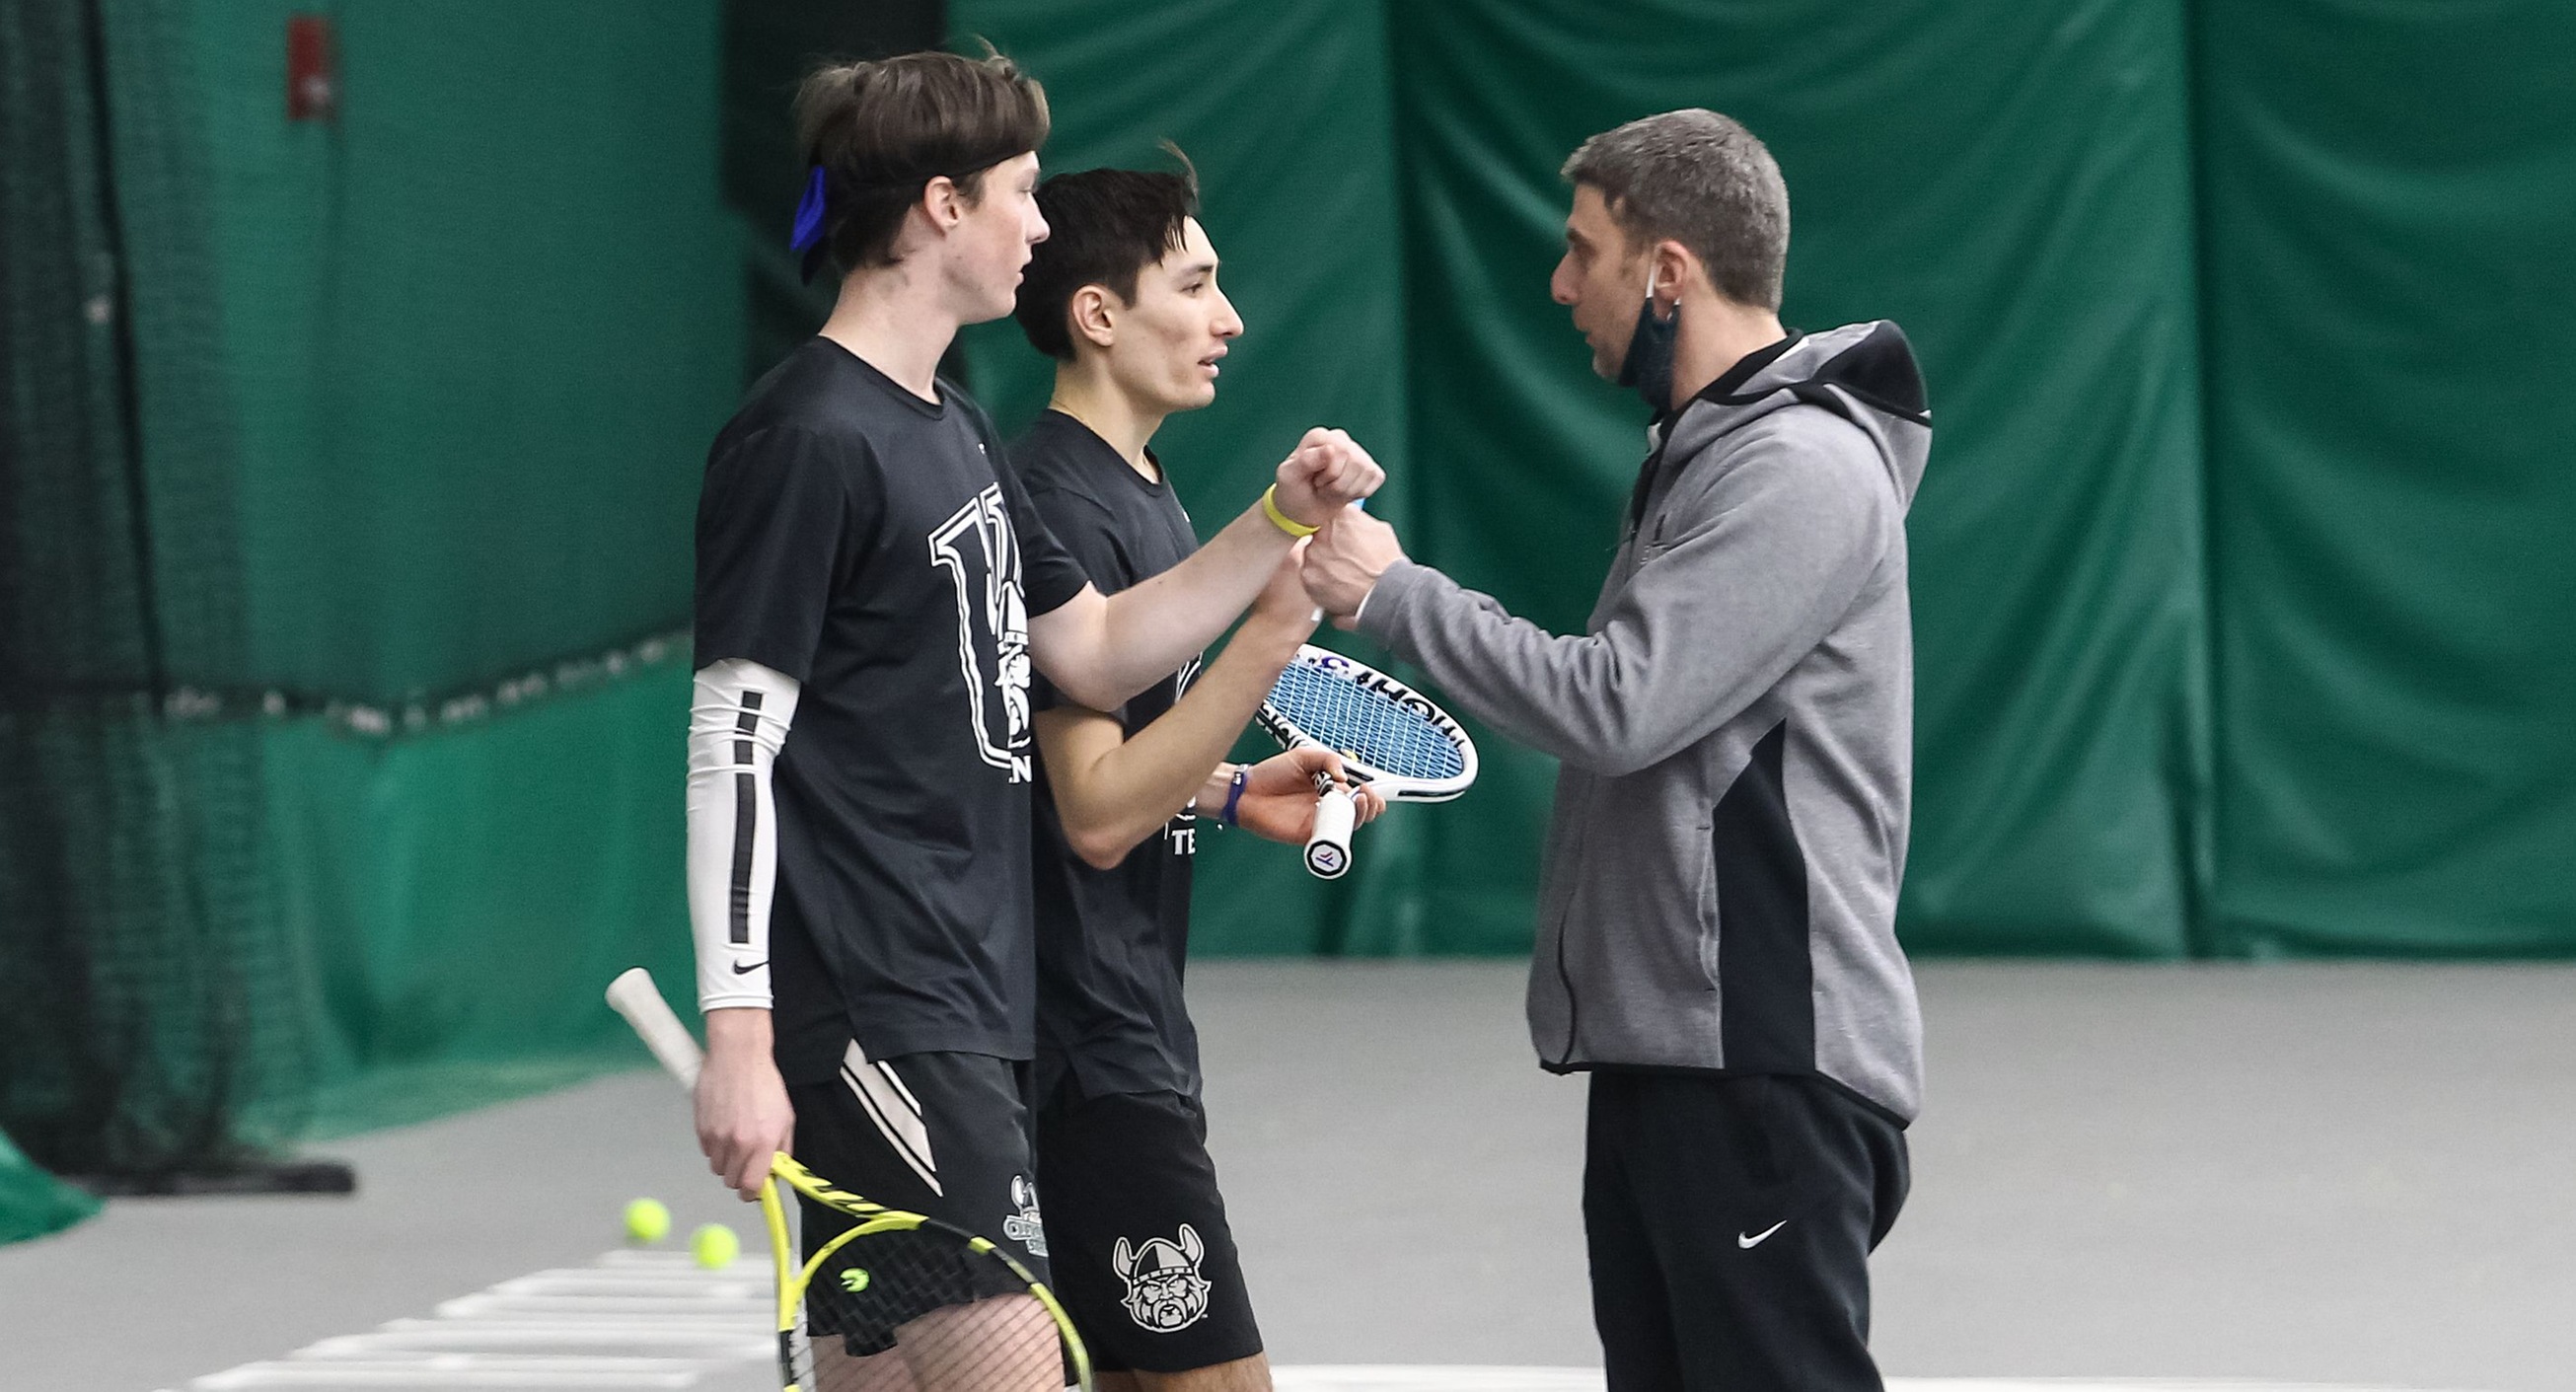 Cleveland State Men’s Tennis Set To Host Toledo & Holy Cross